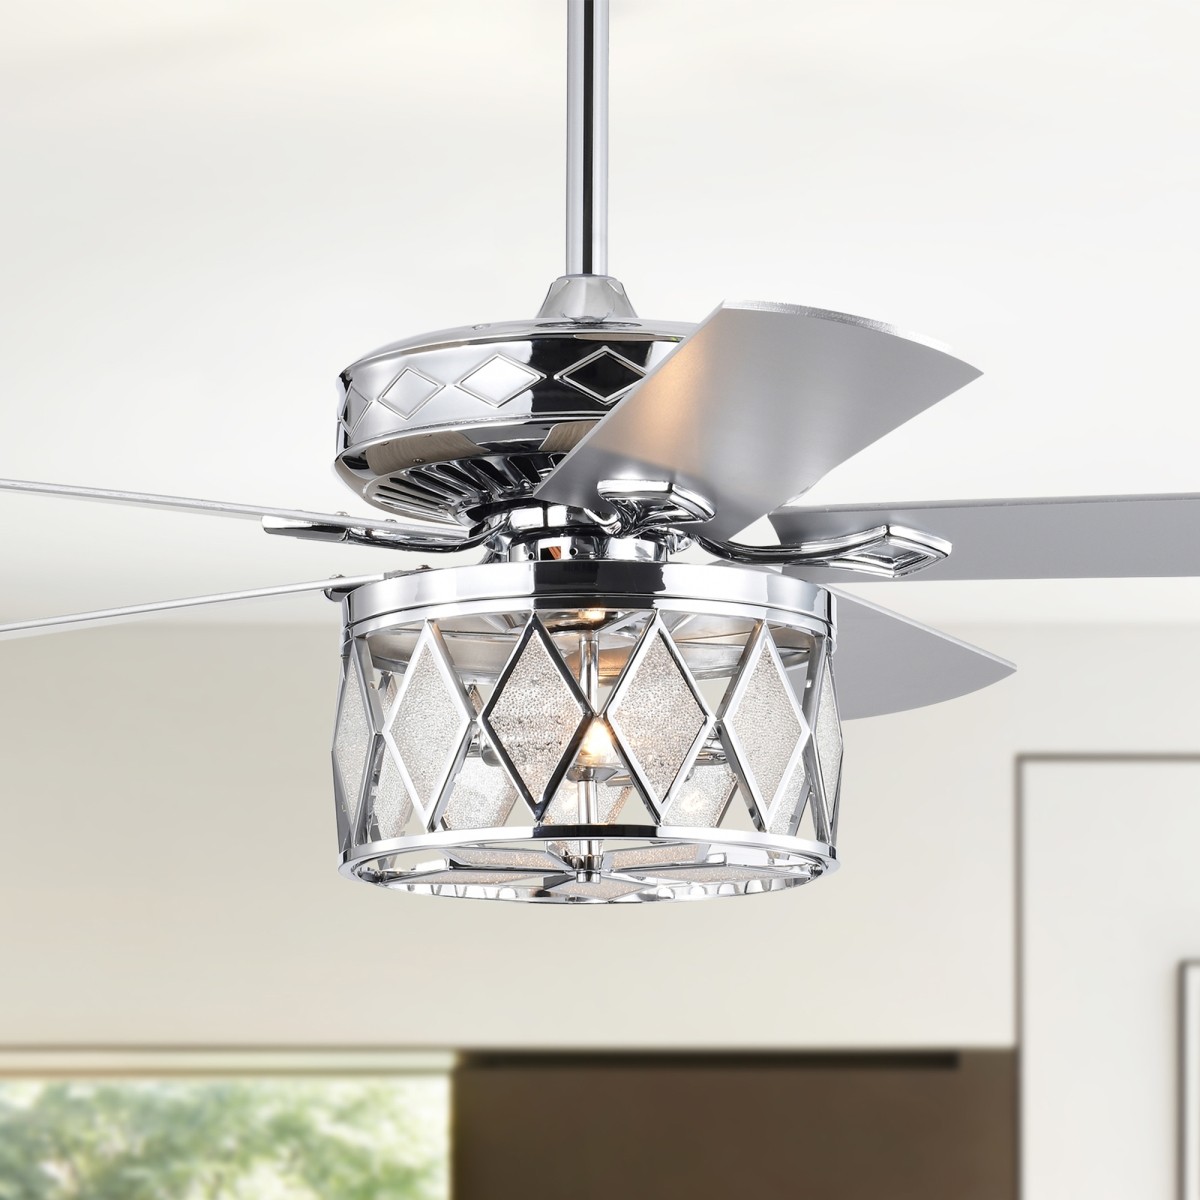 Cadella 52 in. 2-Light Indoor Chrome Finish Ceiling Fan with Light Kit and Remote